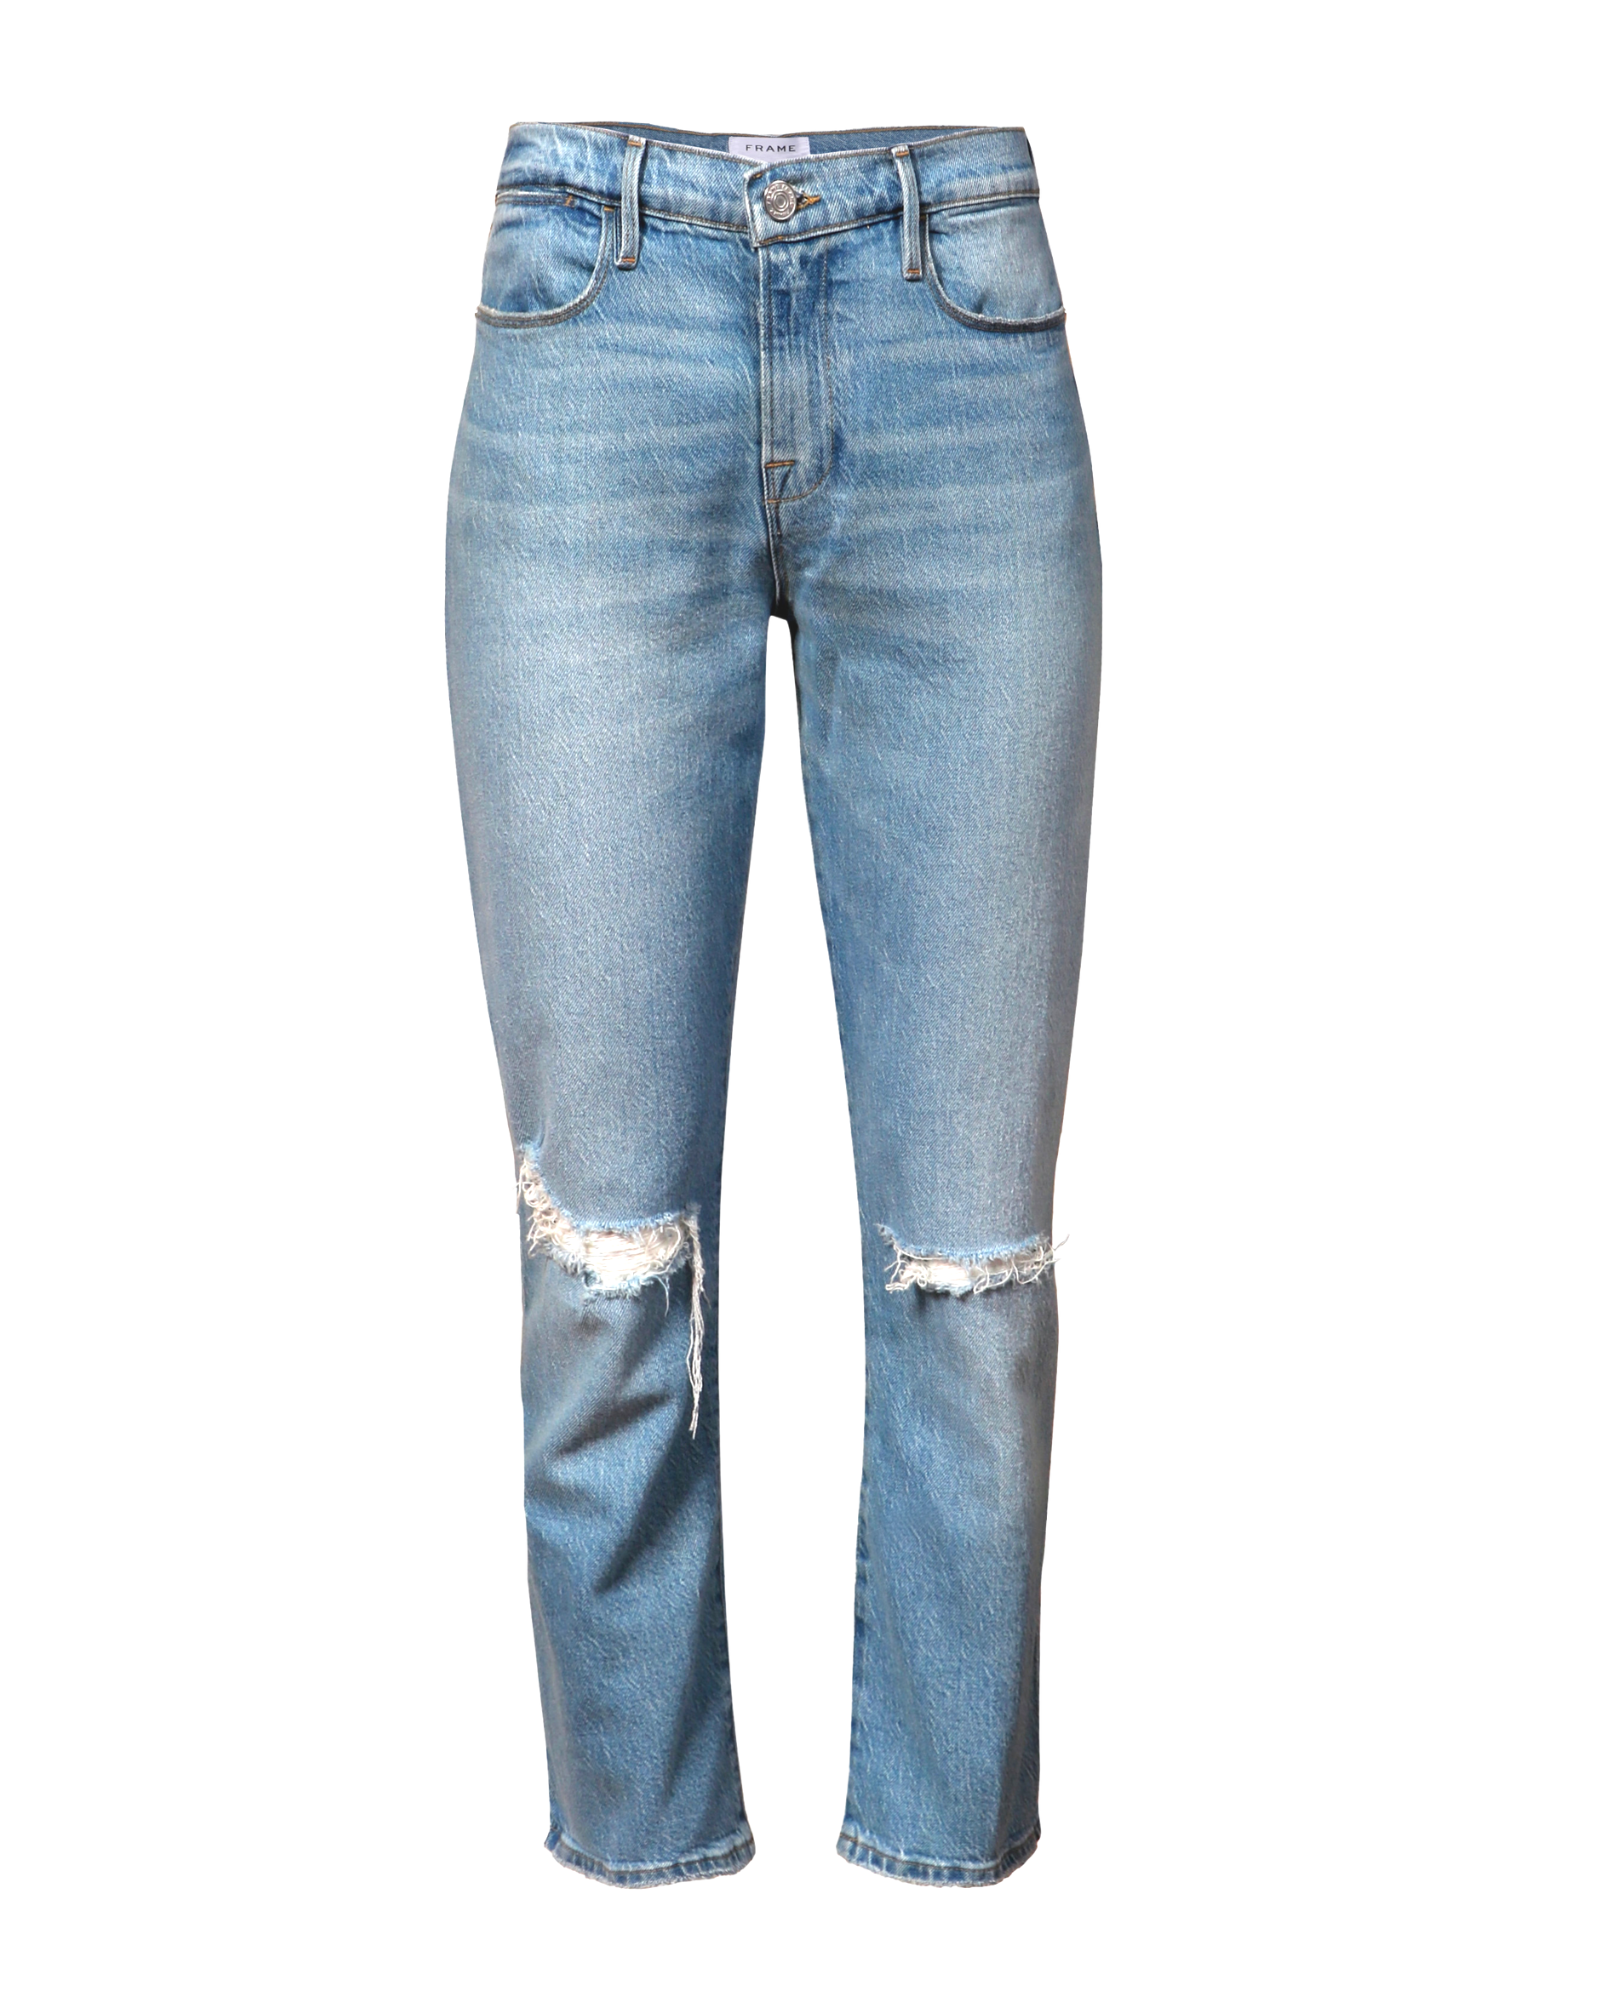 Frame Le High Straight Jean in Demarco Rips